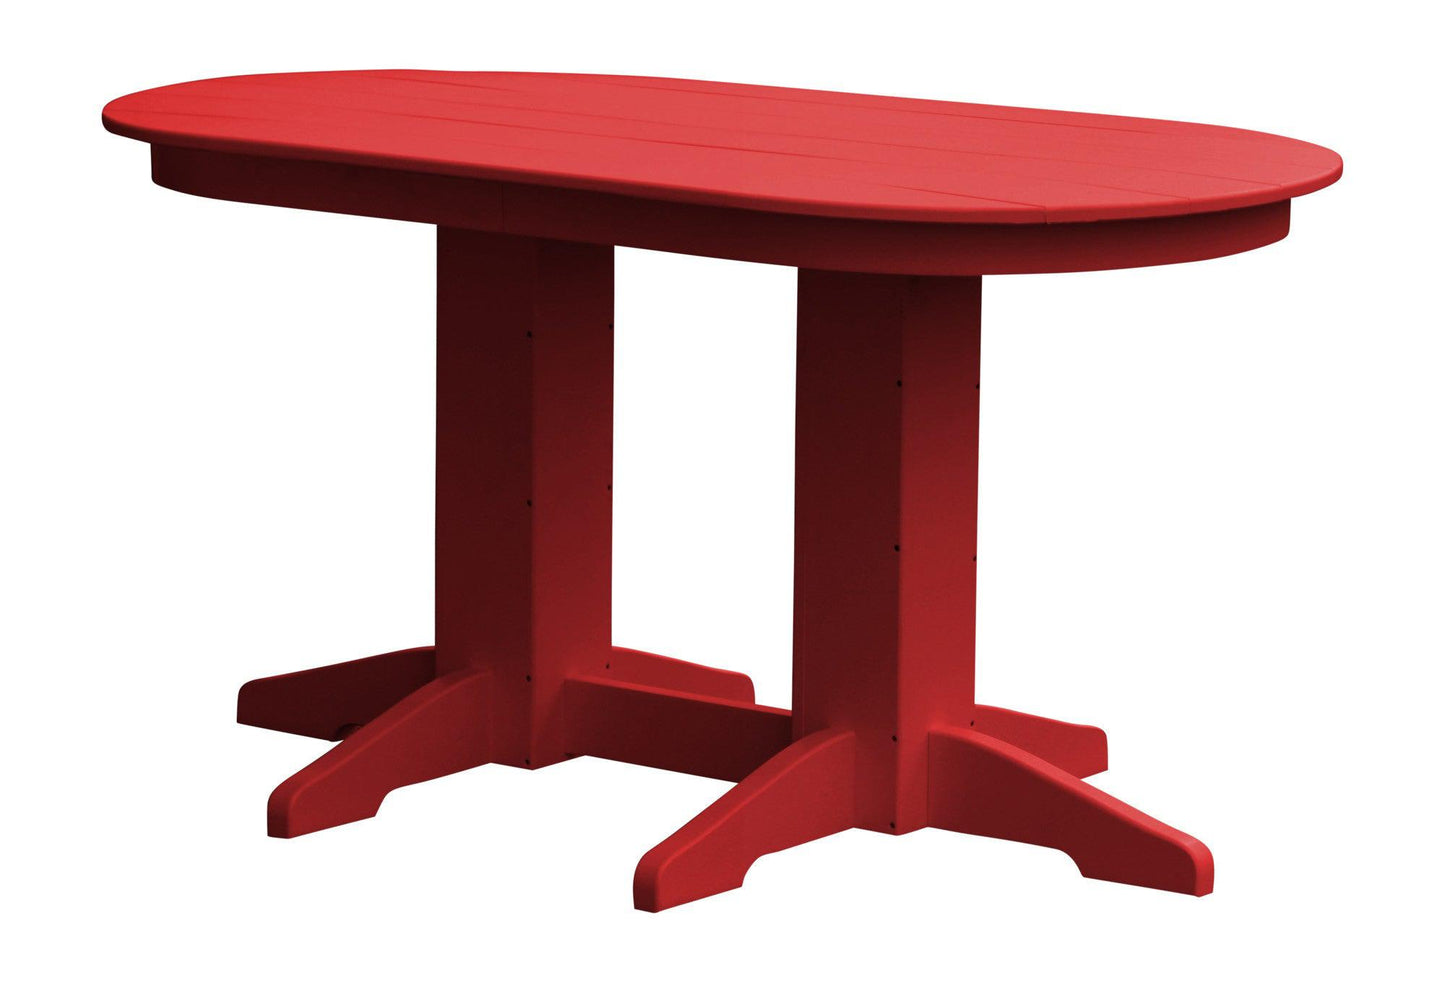 A&L Furniture Company Recycled Plastic 5' Oval Dining Table - Bright Red